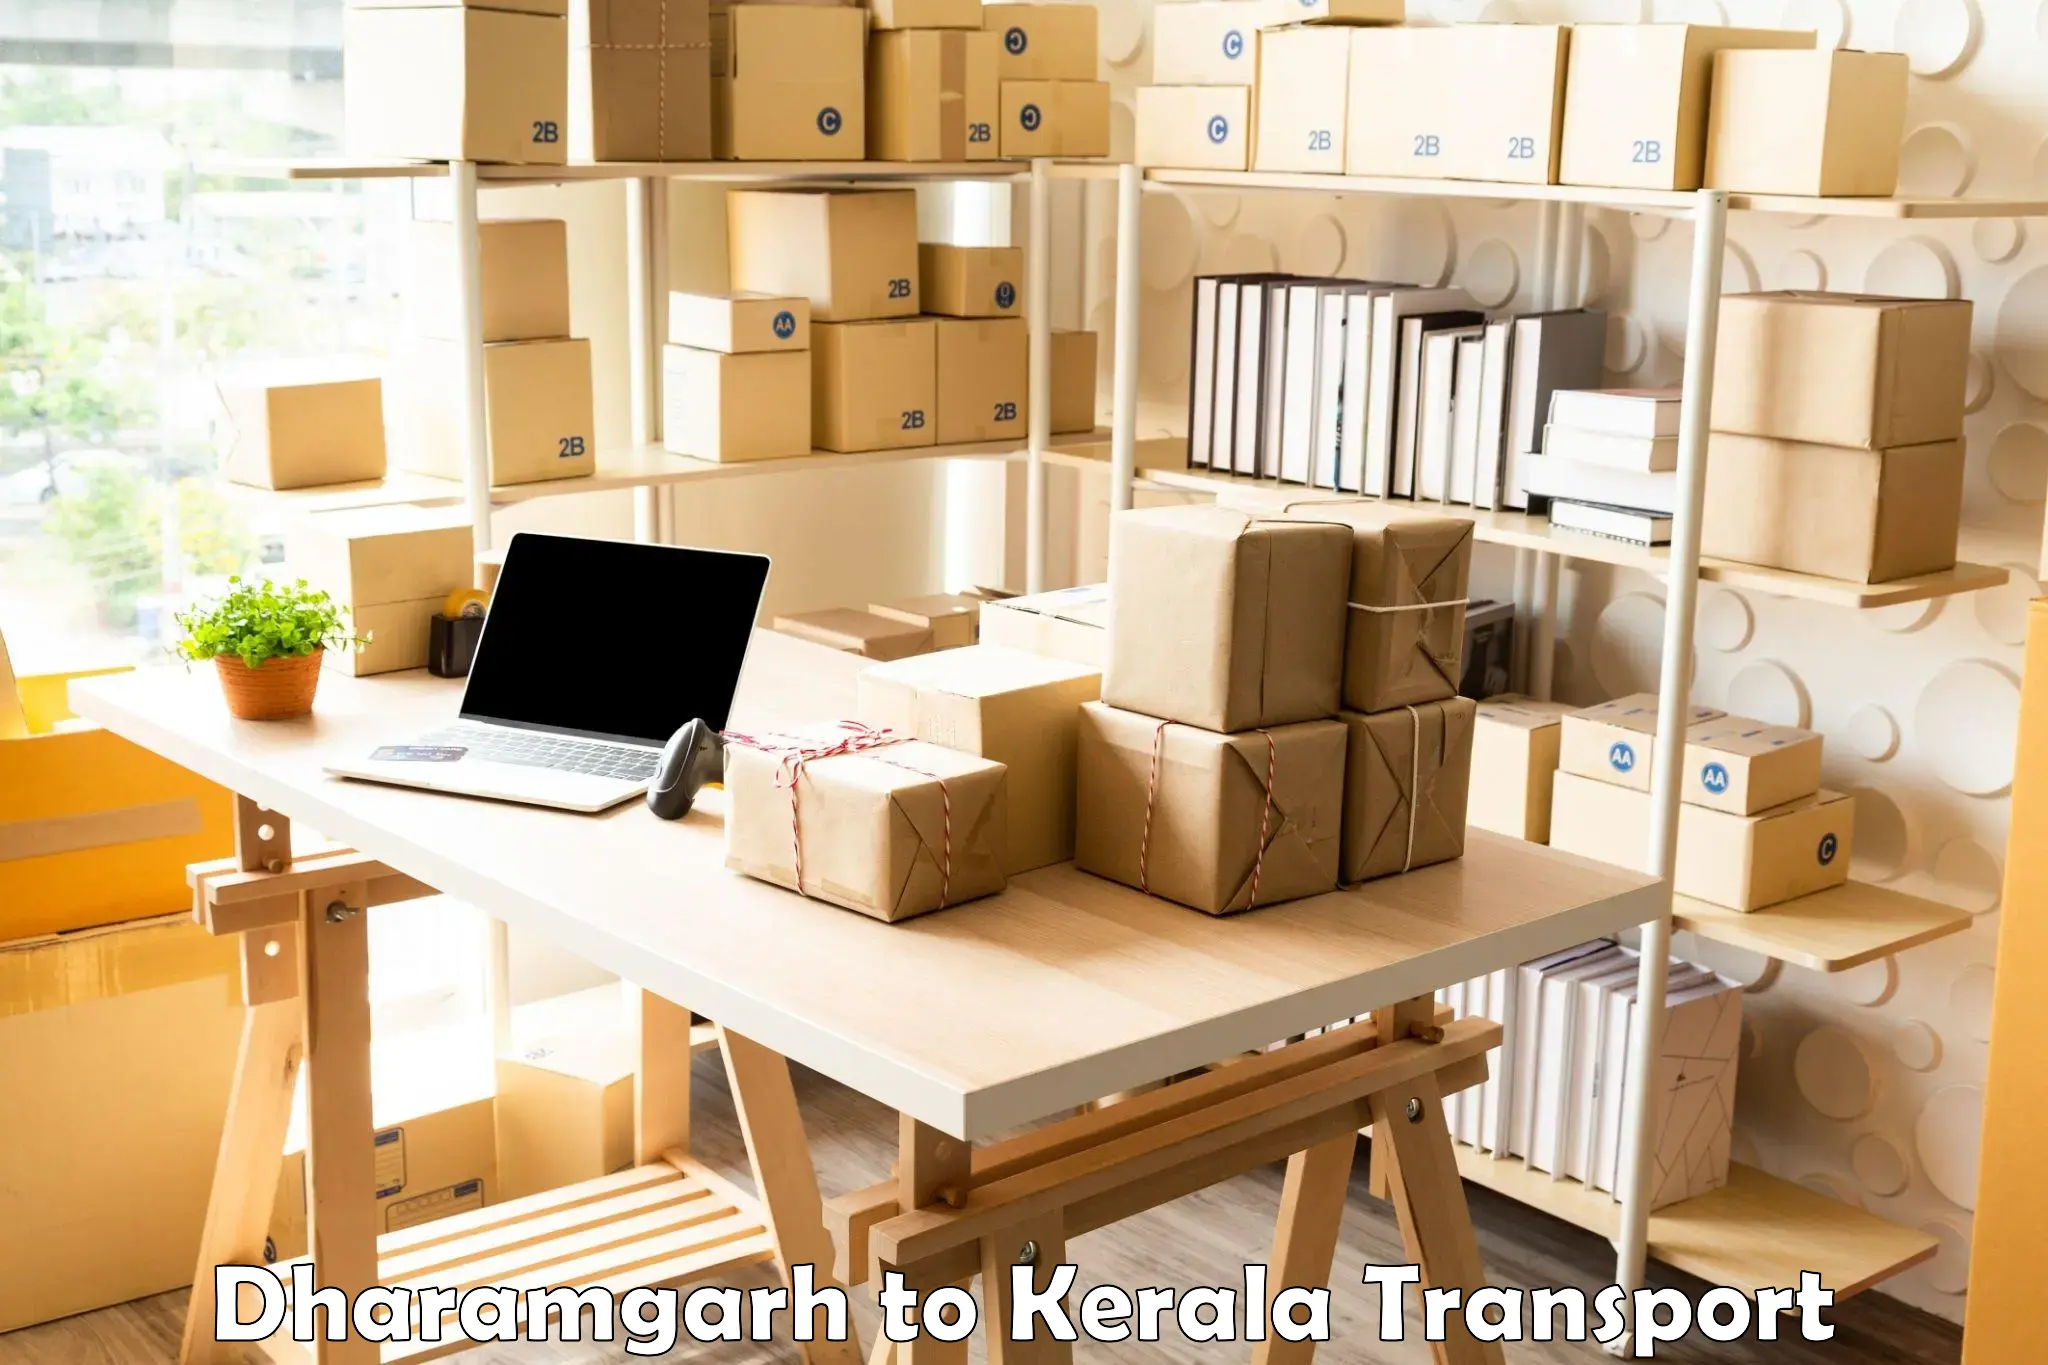 Interstate transport services Dharamgarh to Kerala